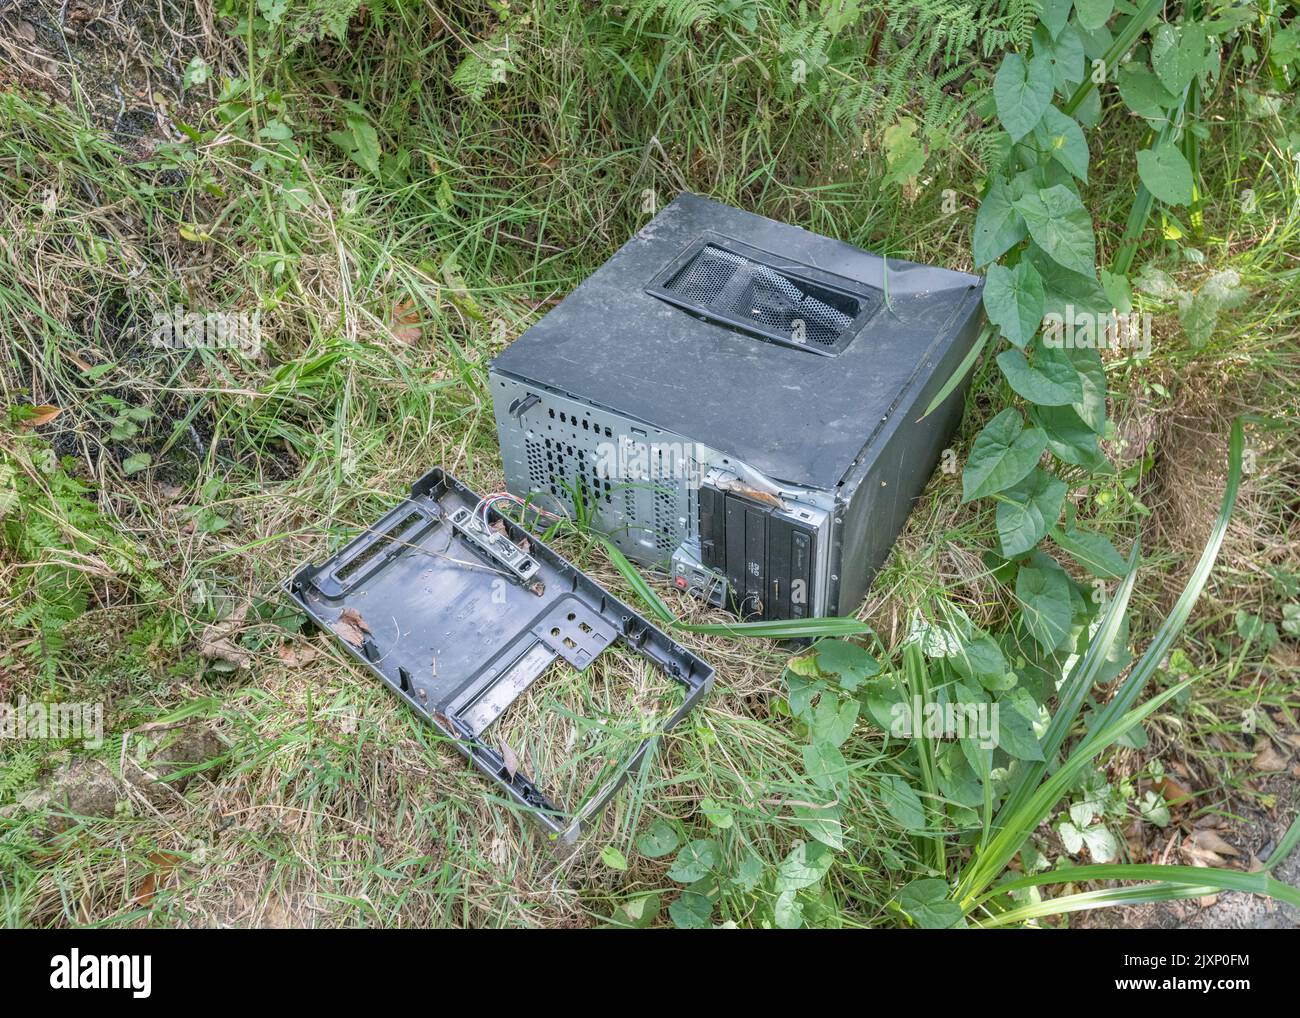 Abandoned old desktop PC / standalone computer dumped in a rural hedgerow - presumably to avoid recycling costs. For e-waste, unwanted computers. Stock Photo